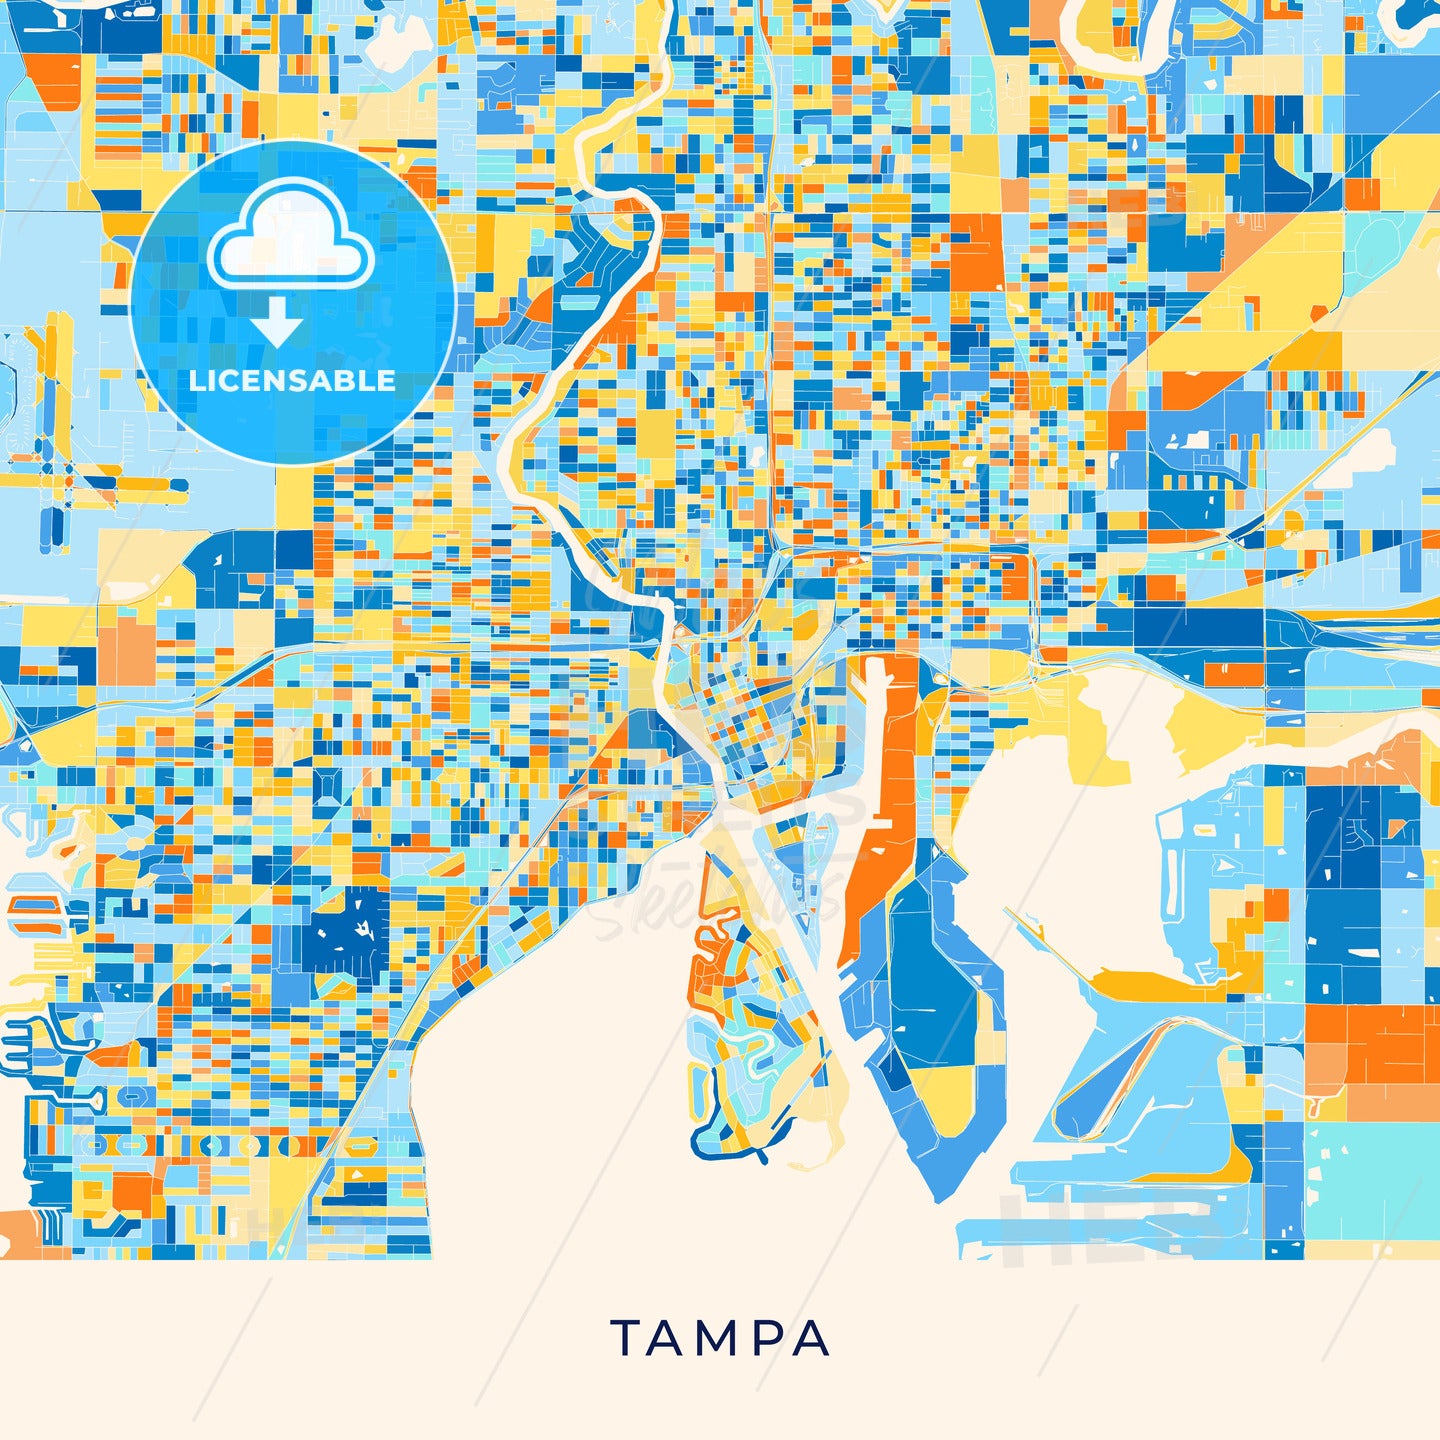 Tampa colorful map poster template